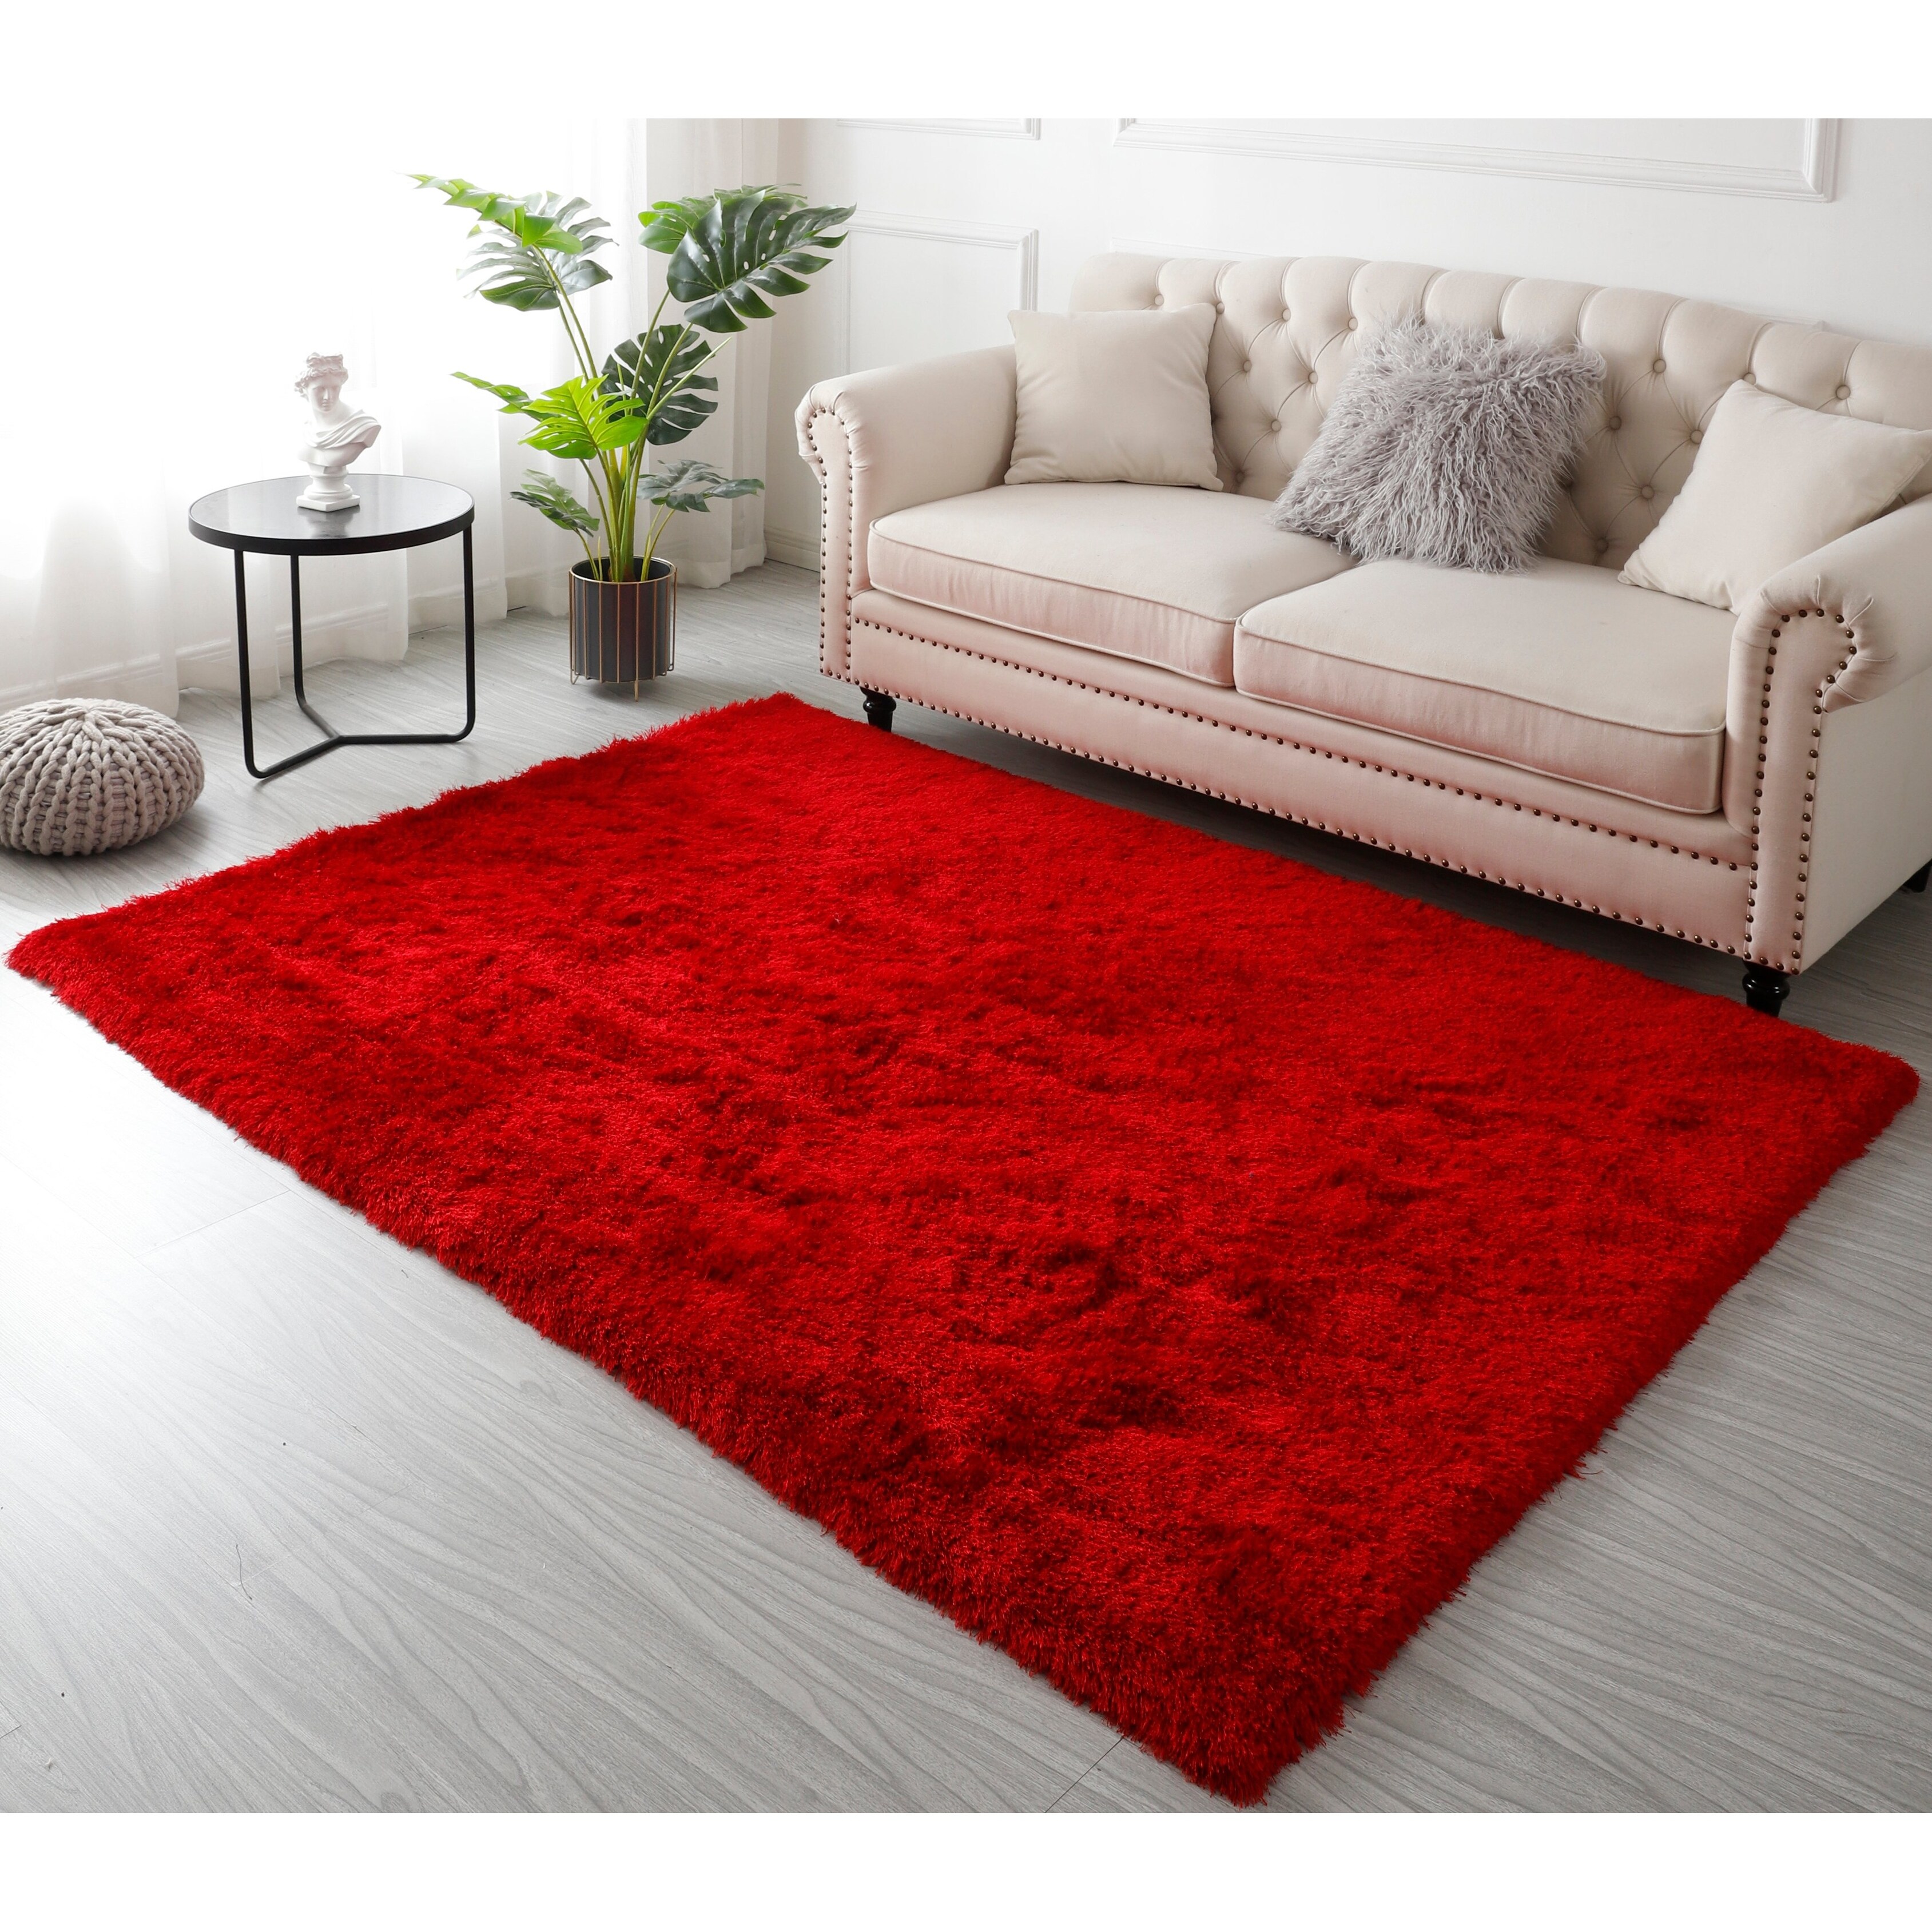 5' x 7', White Home Must Haves Super Soft Thick Plush Pile Cozy Modern Shaggy Shag Microfiber Area Rug 